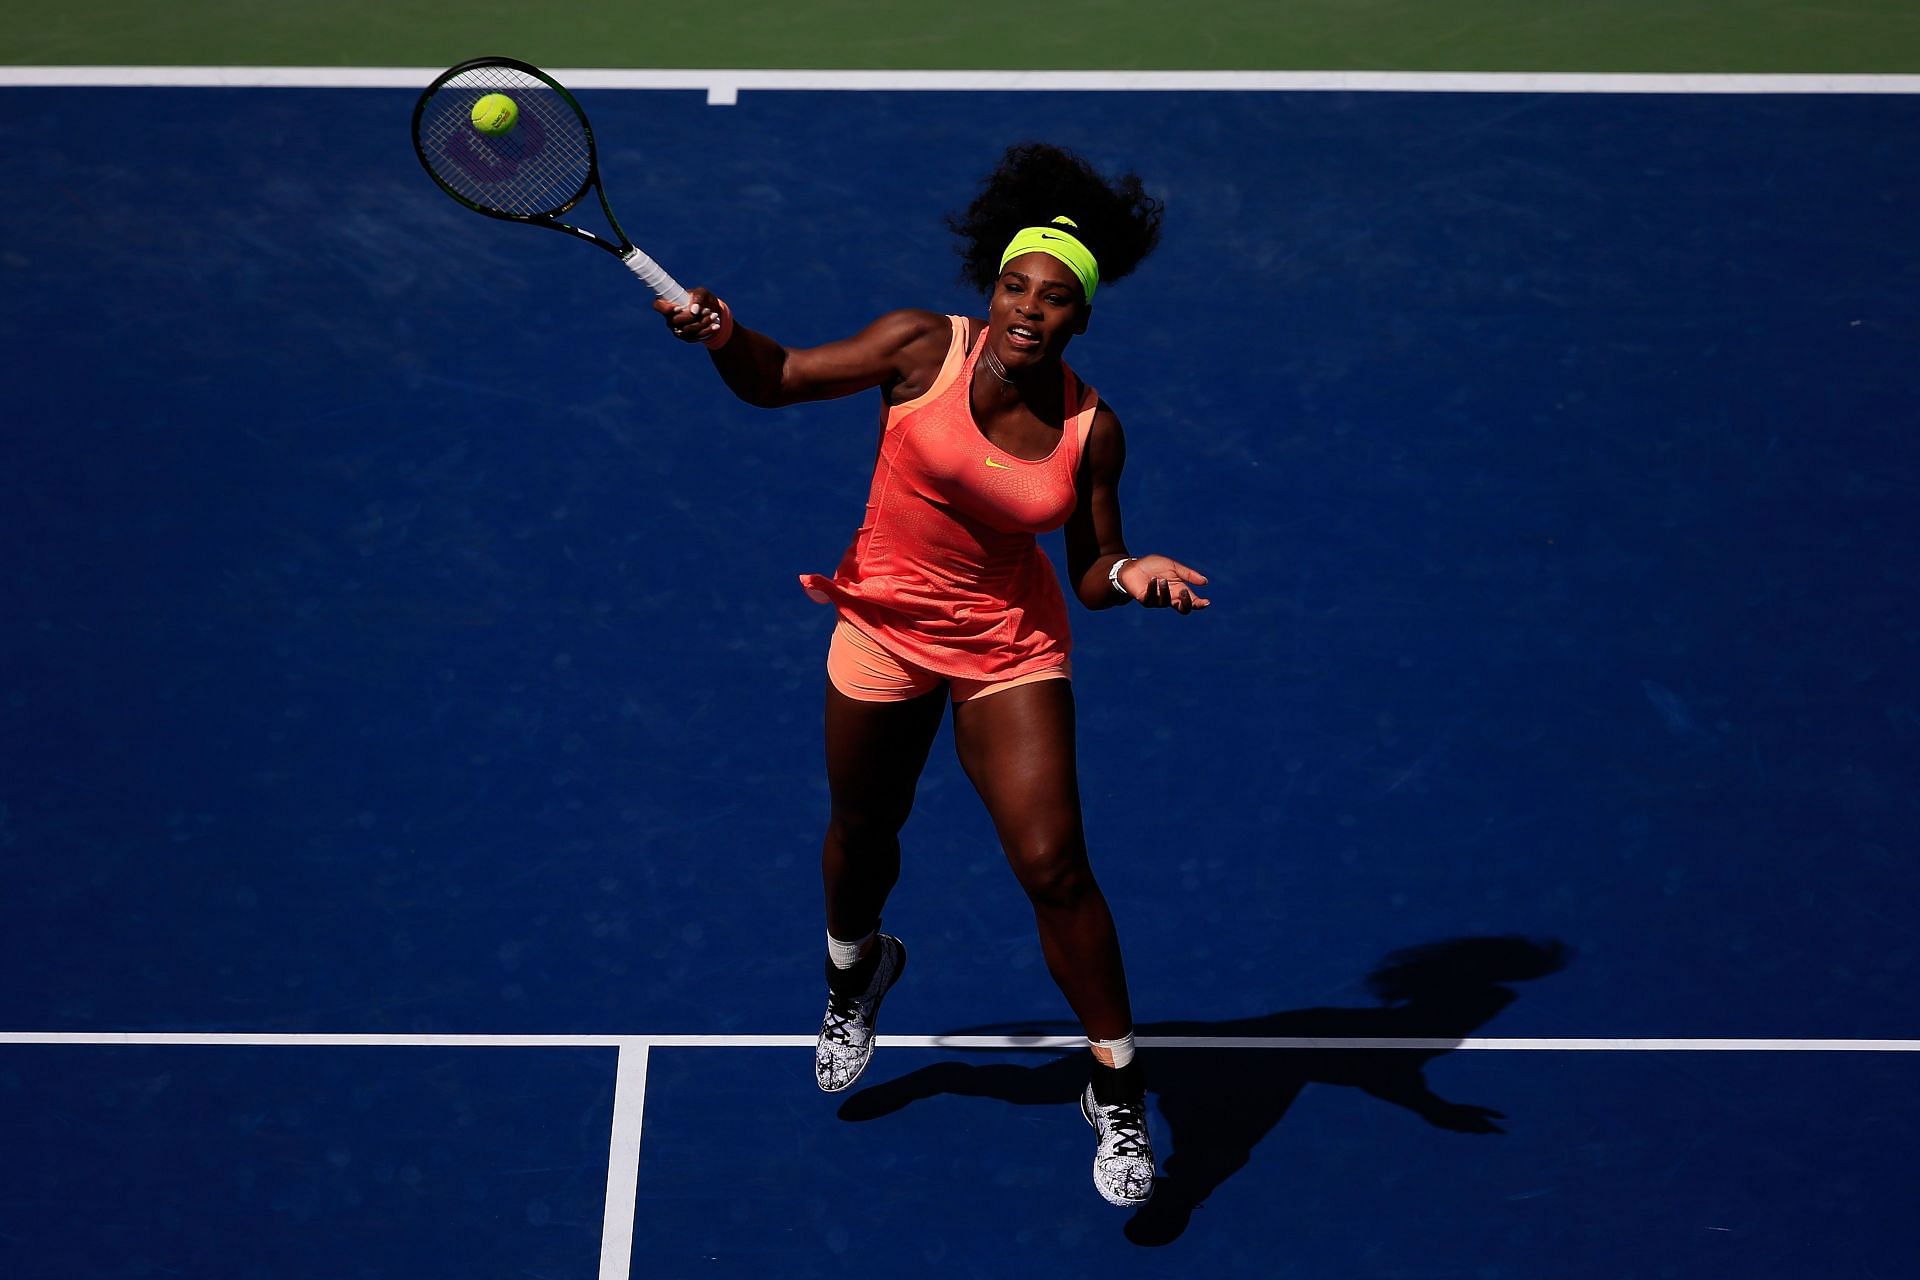 Serena Williams in action at the 2015 US Open